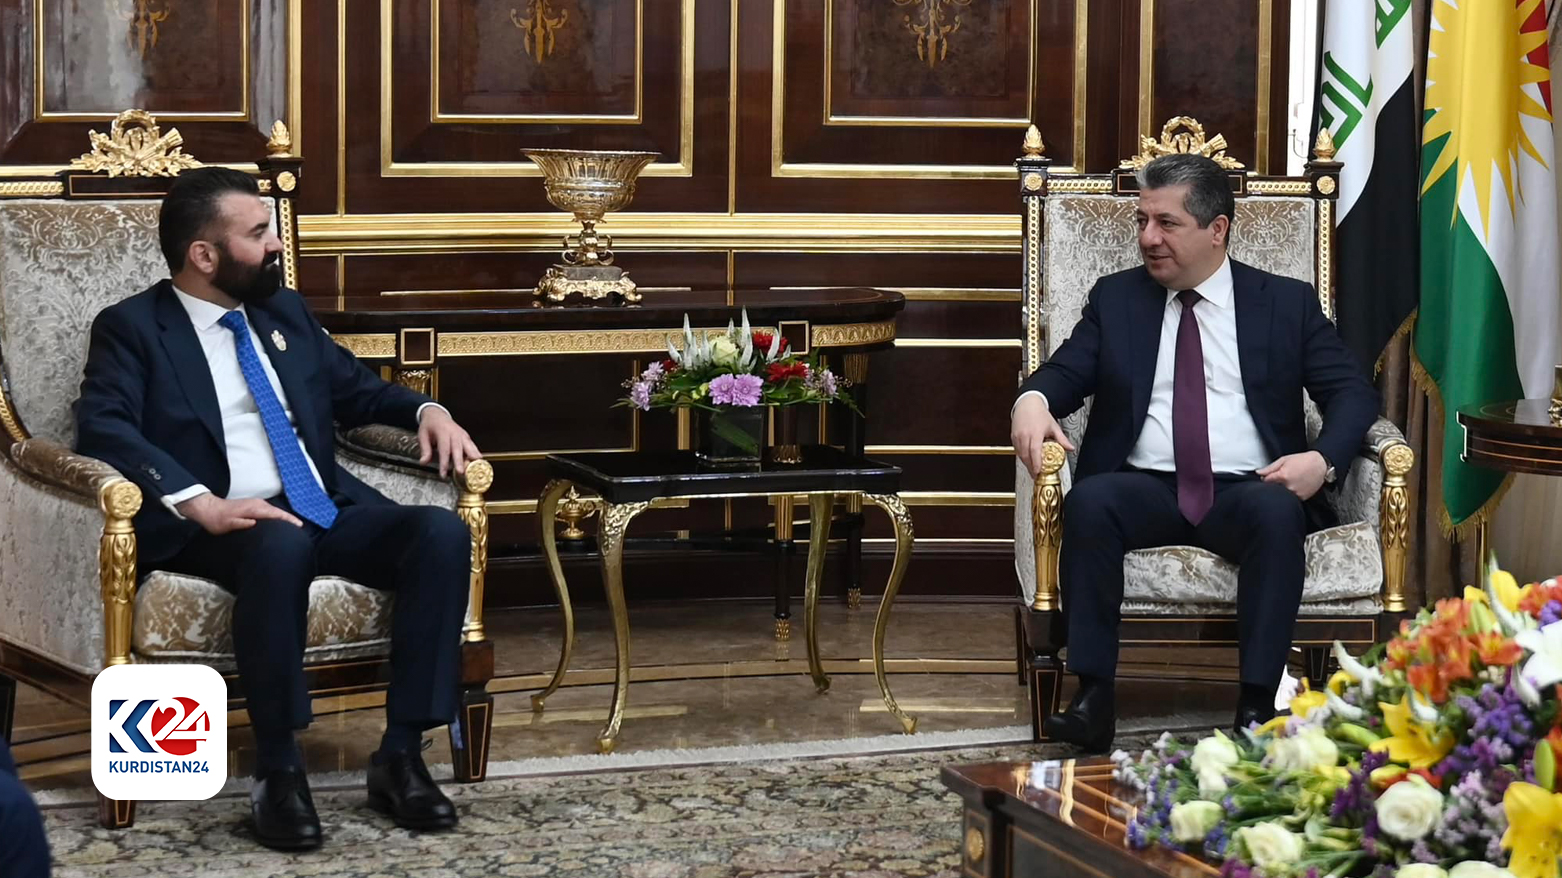 Kurdistan Region Prime Minister Masrour Barzani (right) during his meeting with Sarbaz Barznji, a councilor from the Borough of Lambeth in London, May 15, 2024. (Photo: KRG)